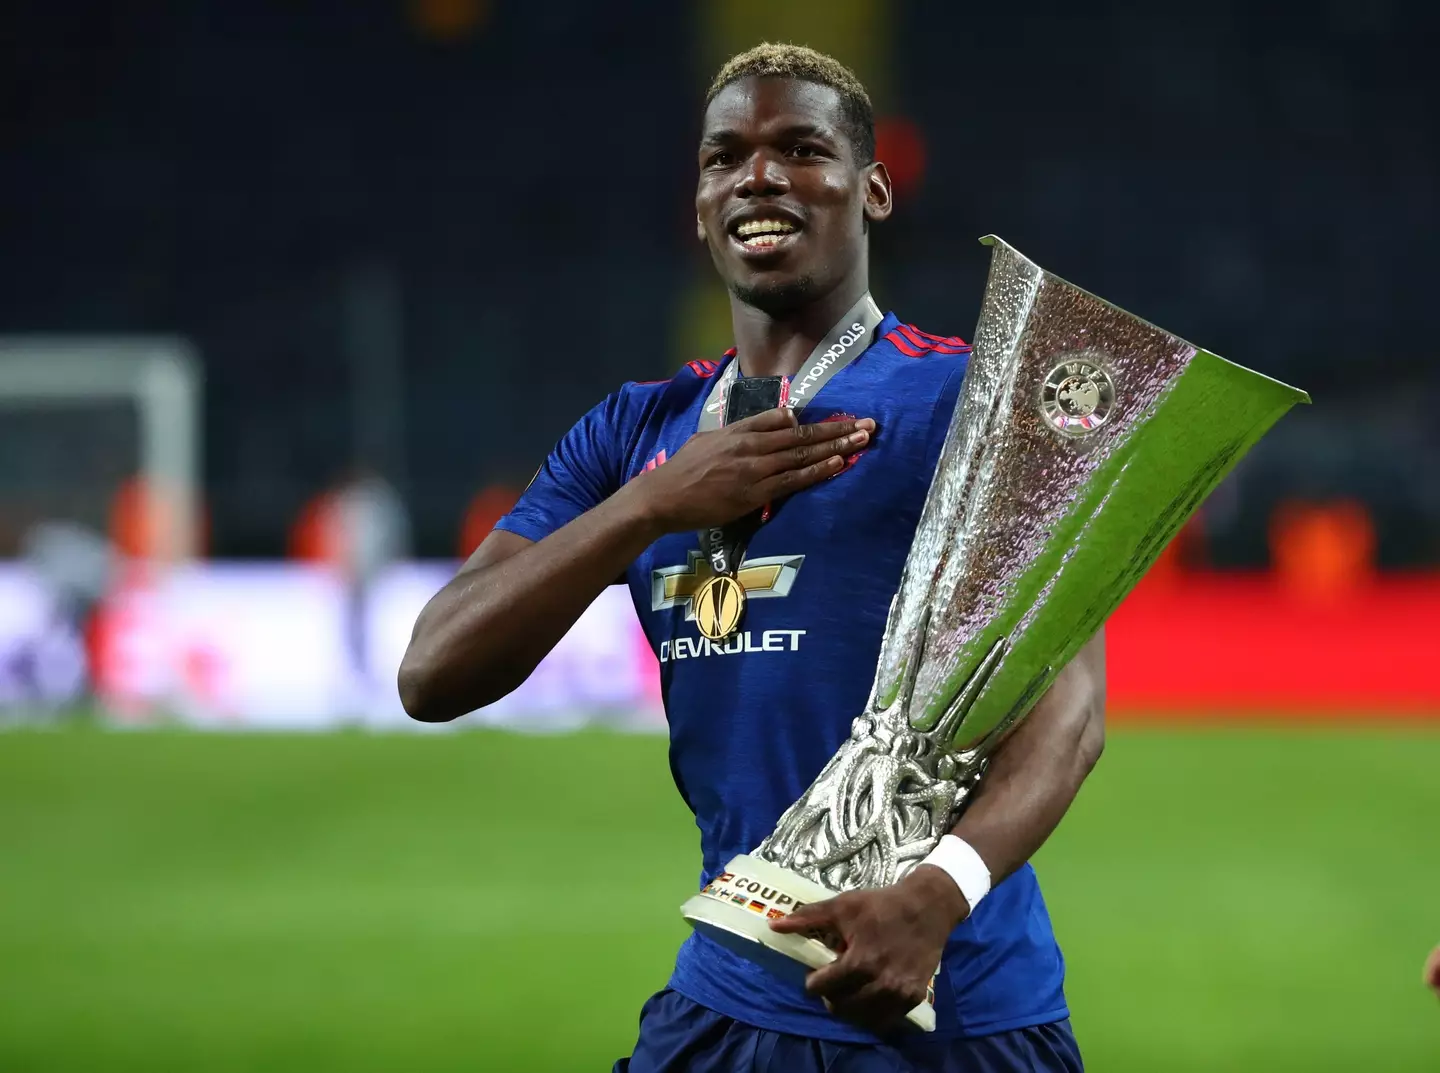 Paul Pogba tapping the Manchester United crest and holding the UEFA Europa League trophy after scoring in the 2017 final against AFC Ajax |